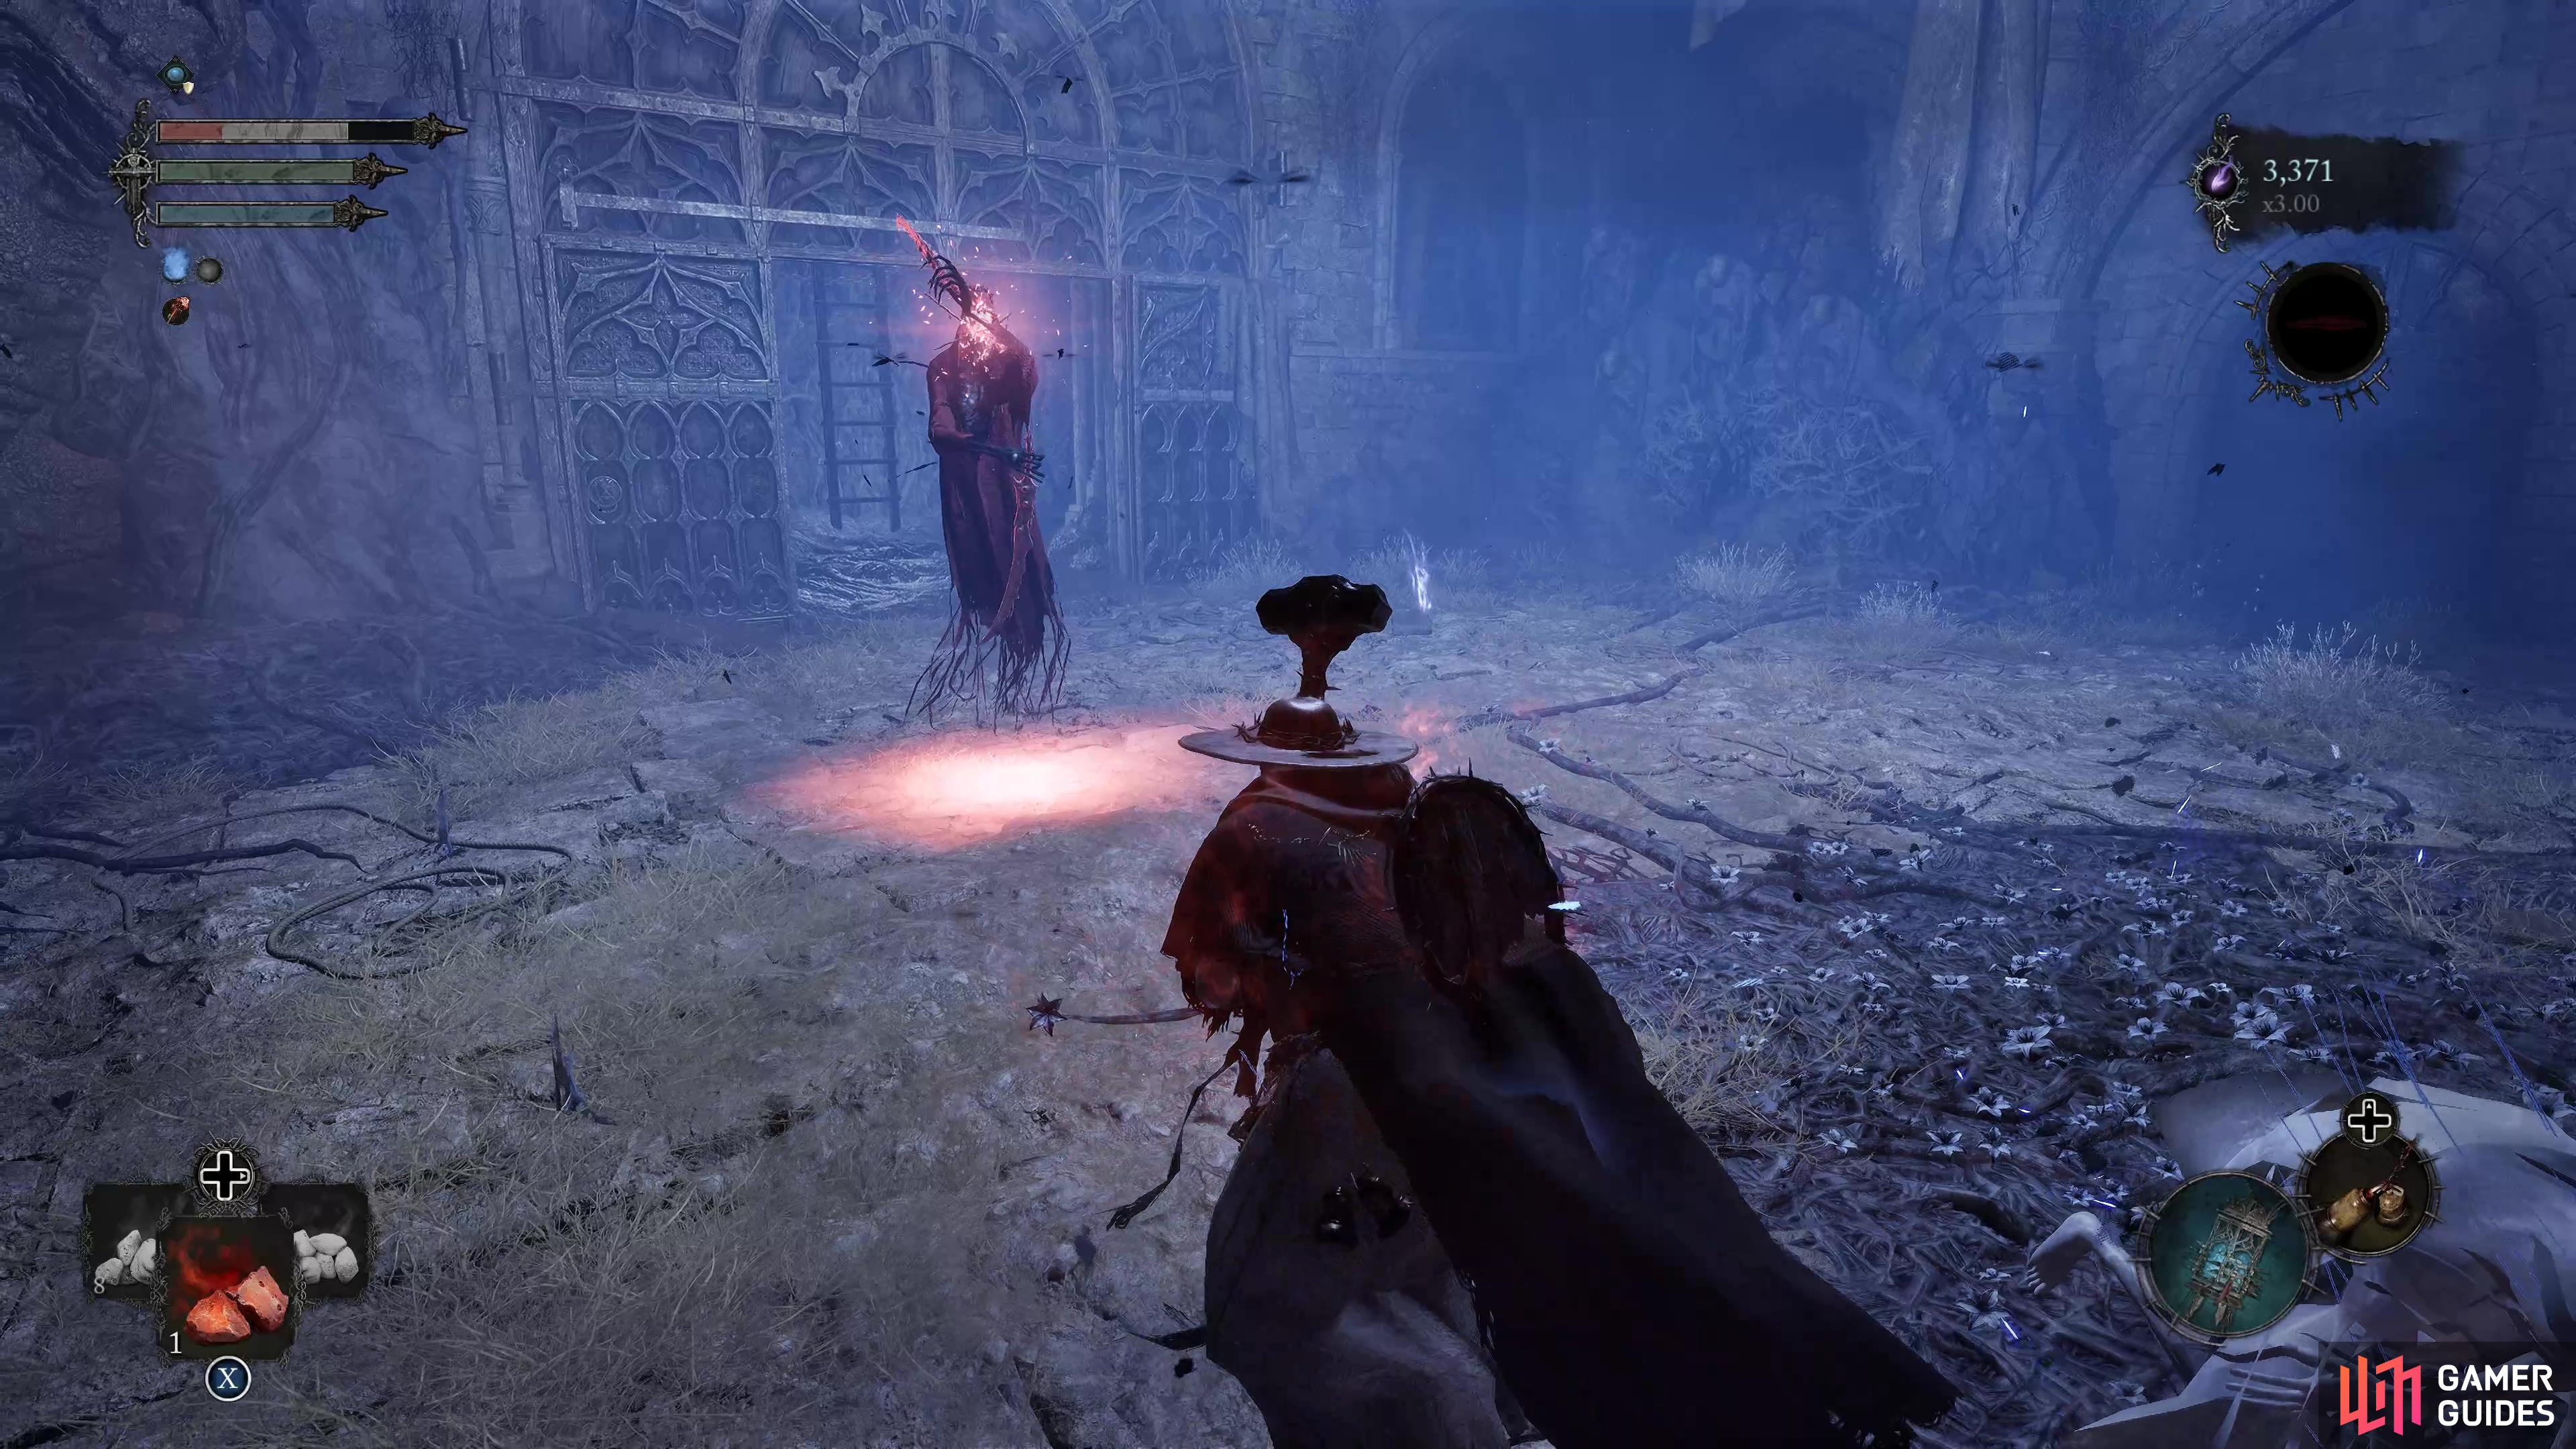 Lords of the Fallen: What Happens if I Stay in the Umbral Too Long